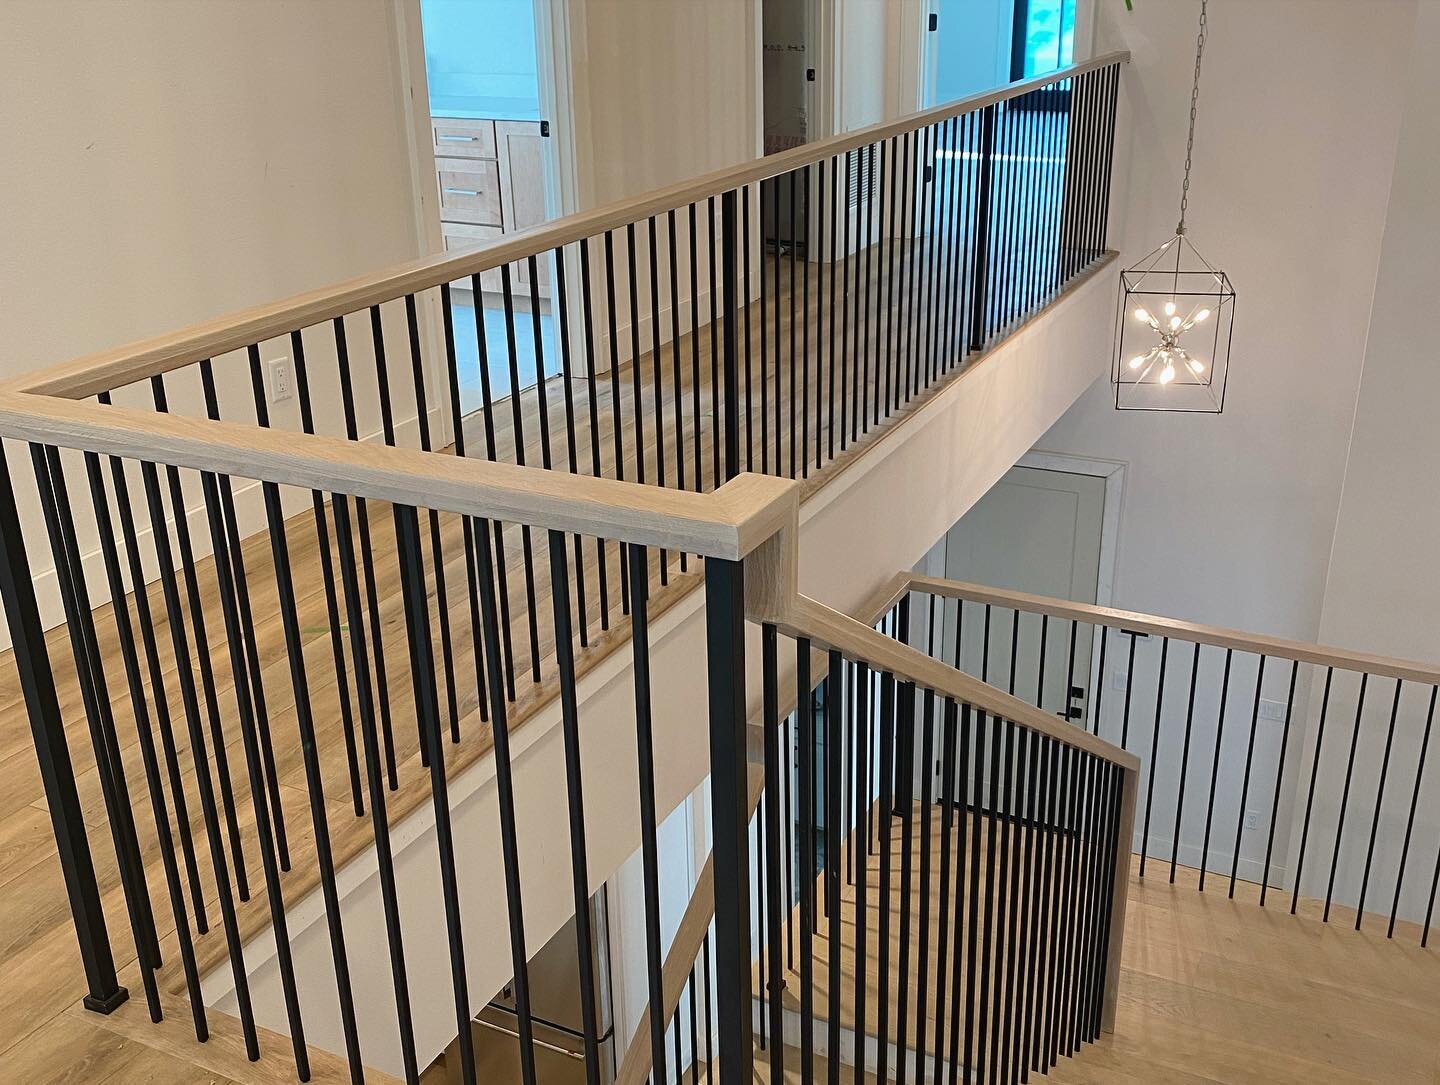 The staircase is such a focal point for this home and it&rsquo;s turning out to be a stunner! #Buildingprojects #buildingplans #buildingjourney #customhomebuilding #customhomebuild #housebuilder #buildinghomes #custombuilders #localbuilder #customhom